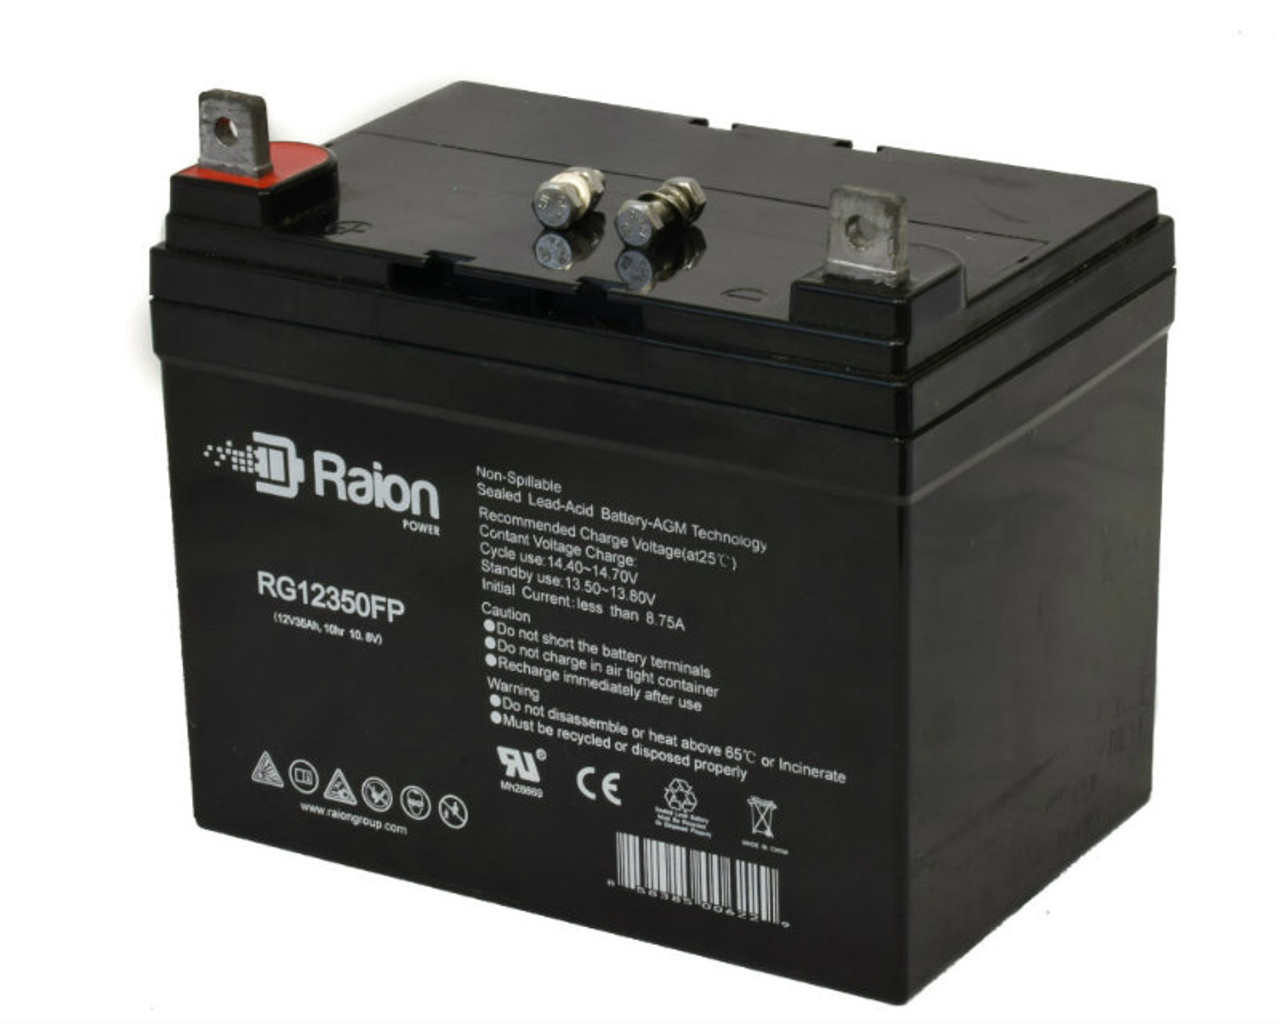 Raion Power Replacement 12V 35Ah RG12350FP Mobility Scooter Battery for Amigo Mobility EXT350 670000